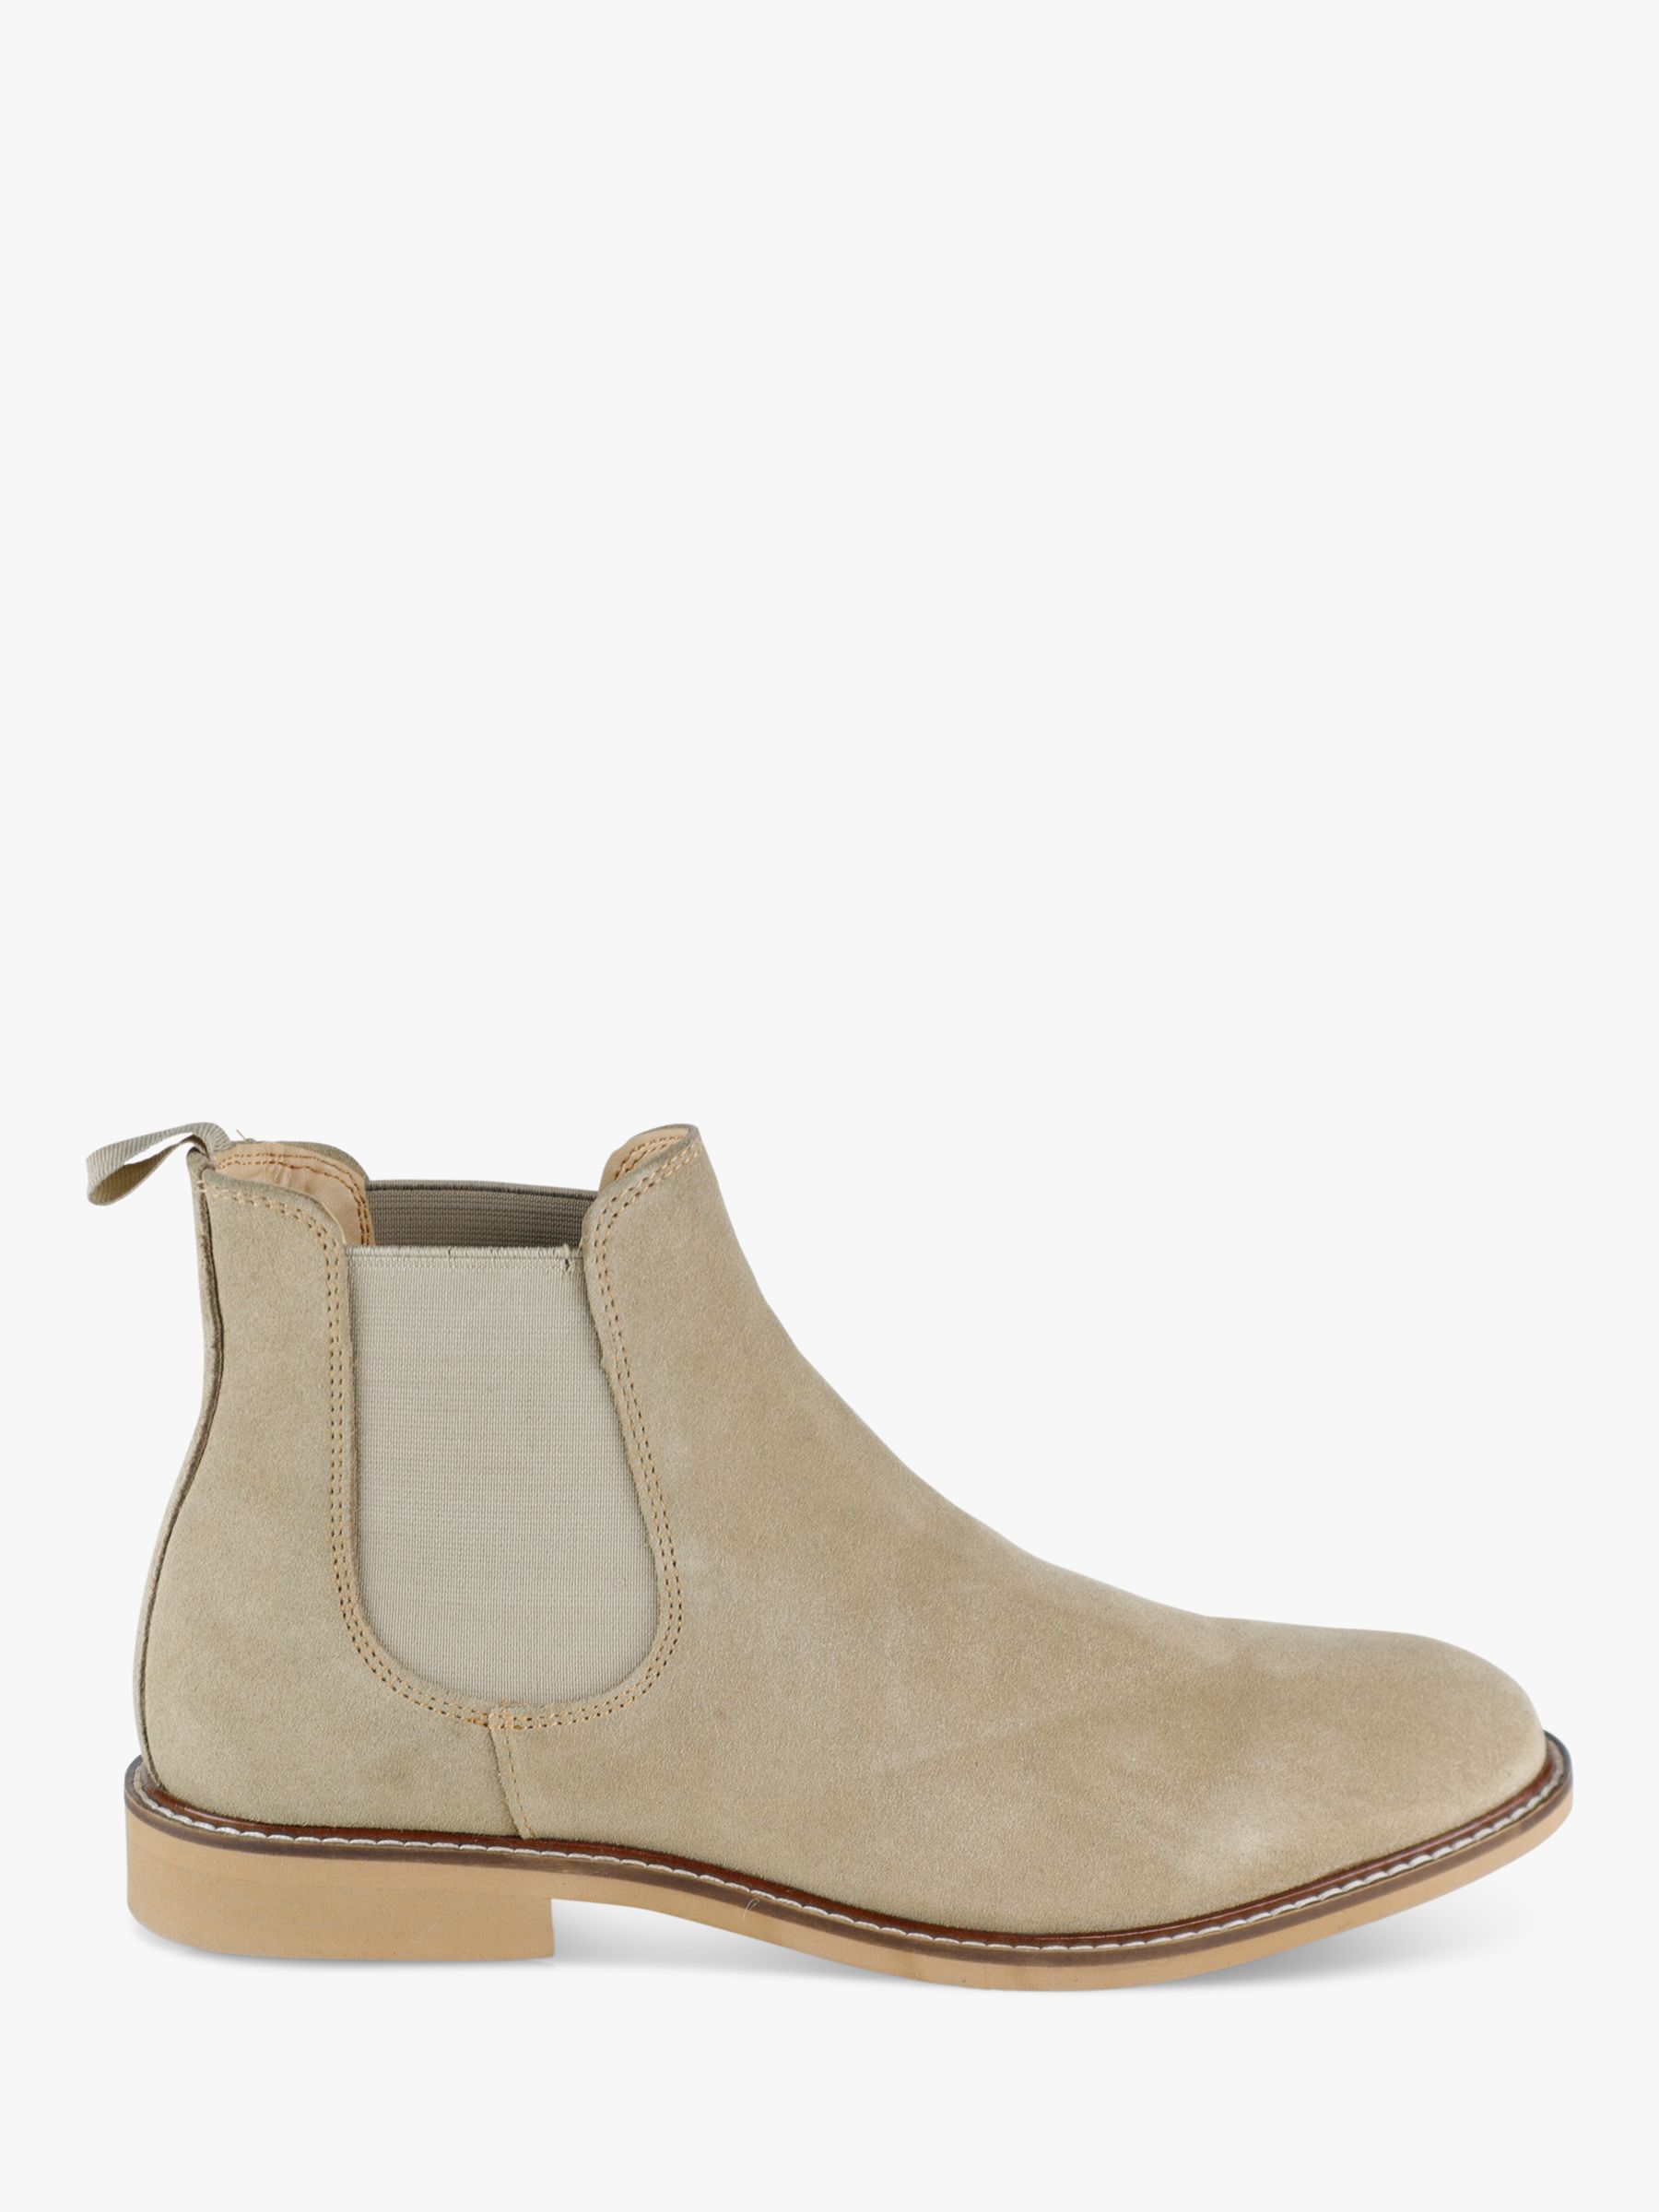 Silver Street London San Diego Suede Chelsea Boots, Sand, 11